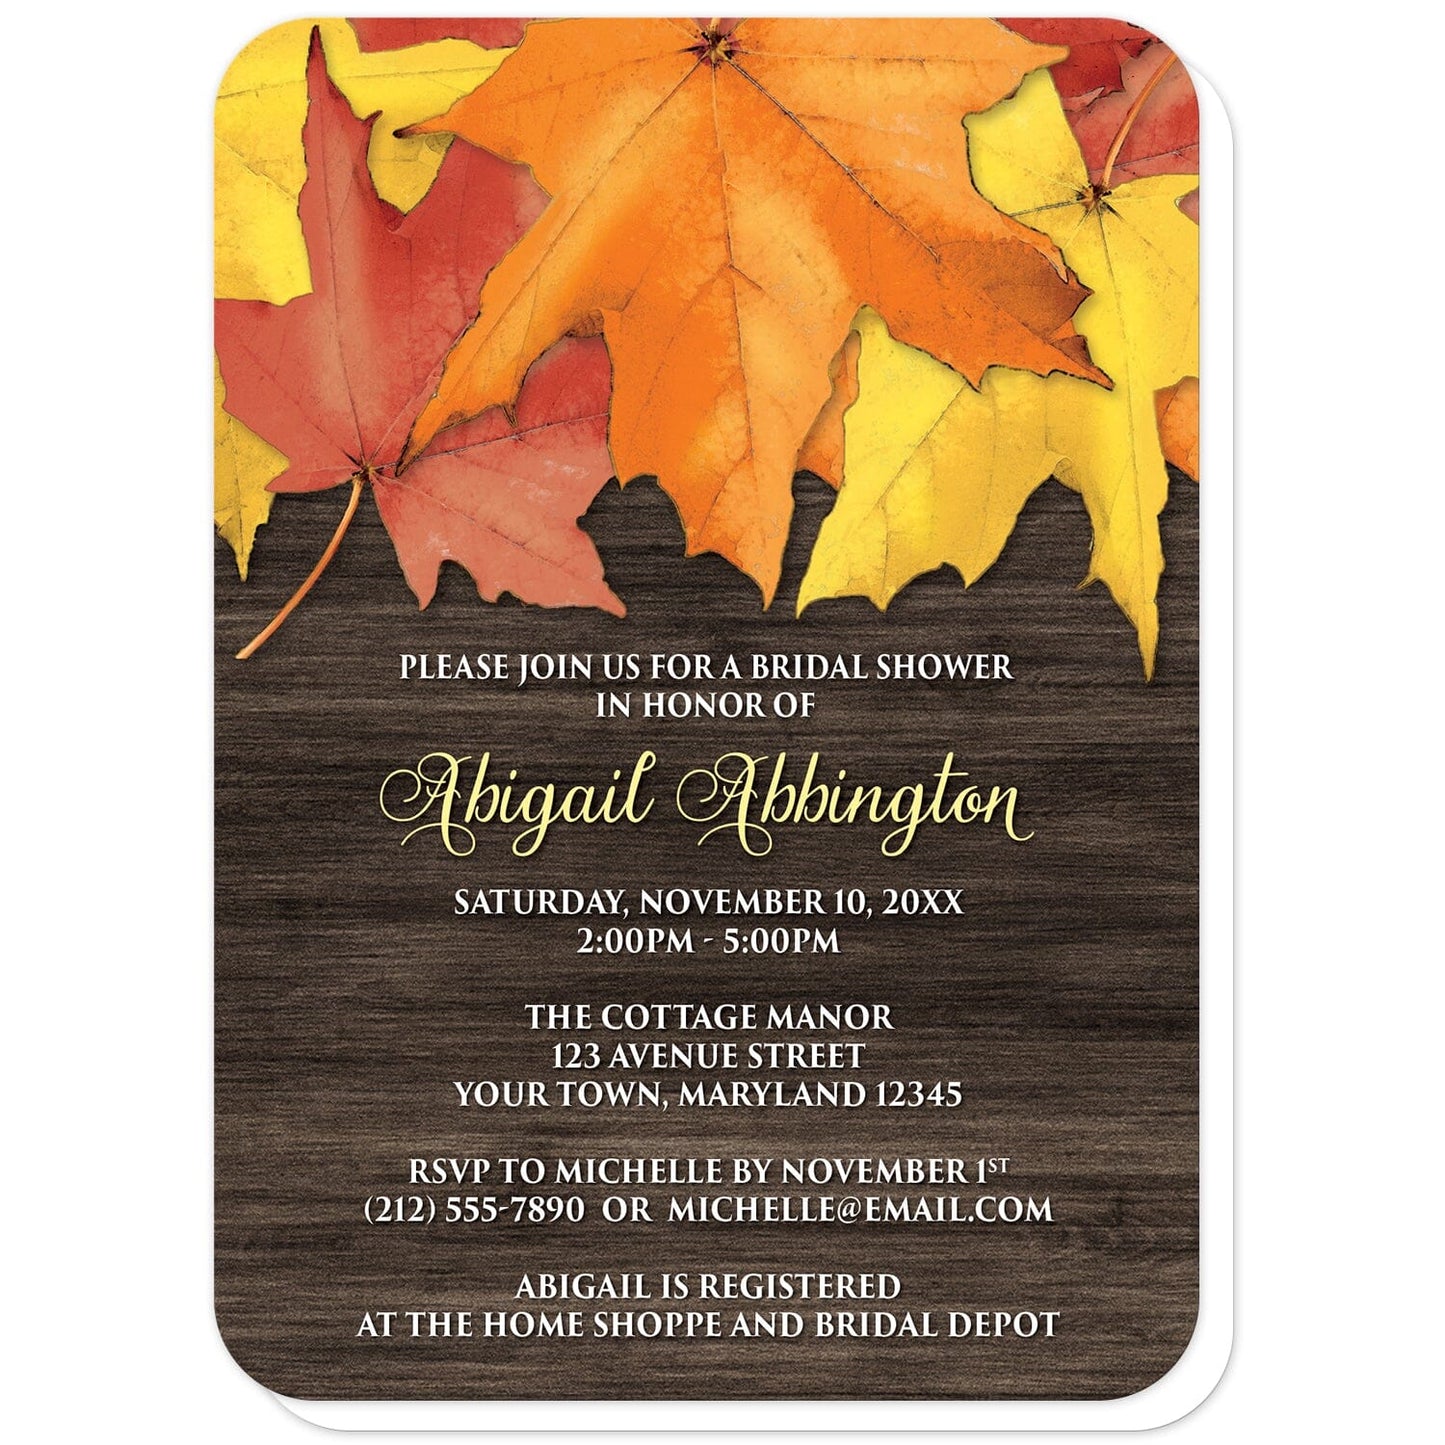 Rustic Autumn Leaves Wood Bridal Shower Invitations (with rounded corners) at Artistically Invited. Southern-inspired rustic autumn leaves wood bridal shower invitations with an arrangement of rustic yellow, orange, and red fall leaves along the top over a dark brown wood pattern. Your personalized bridal shower celebration details are custom printed in yellow and white over the rustic wood background. 